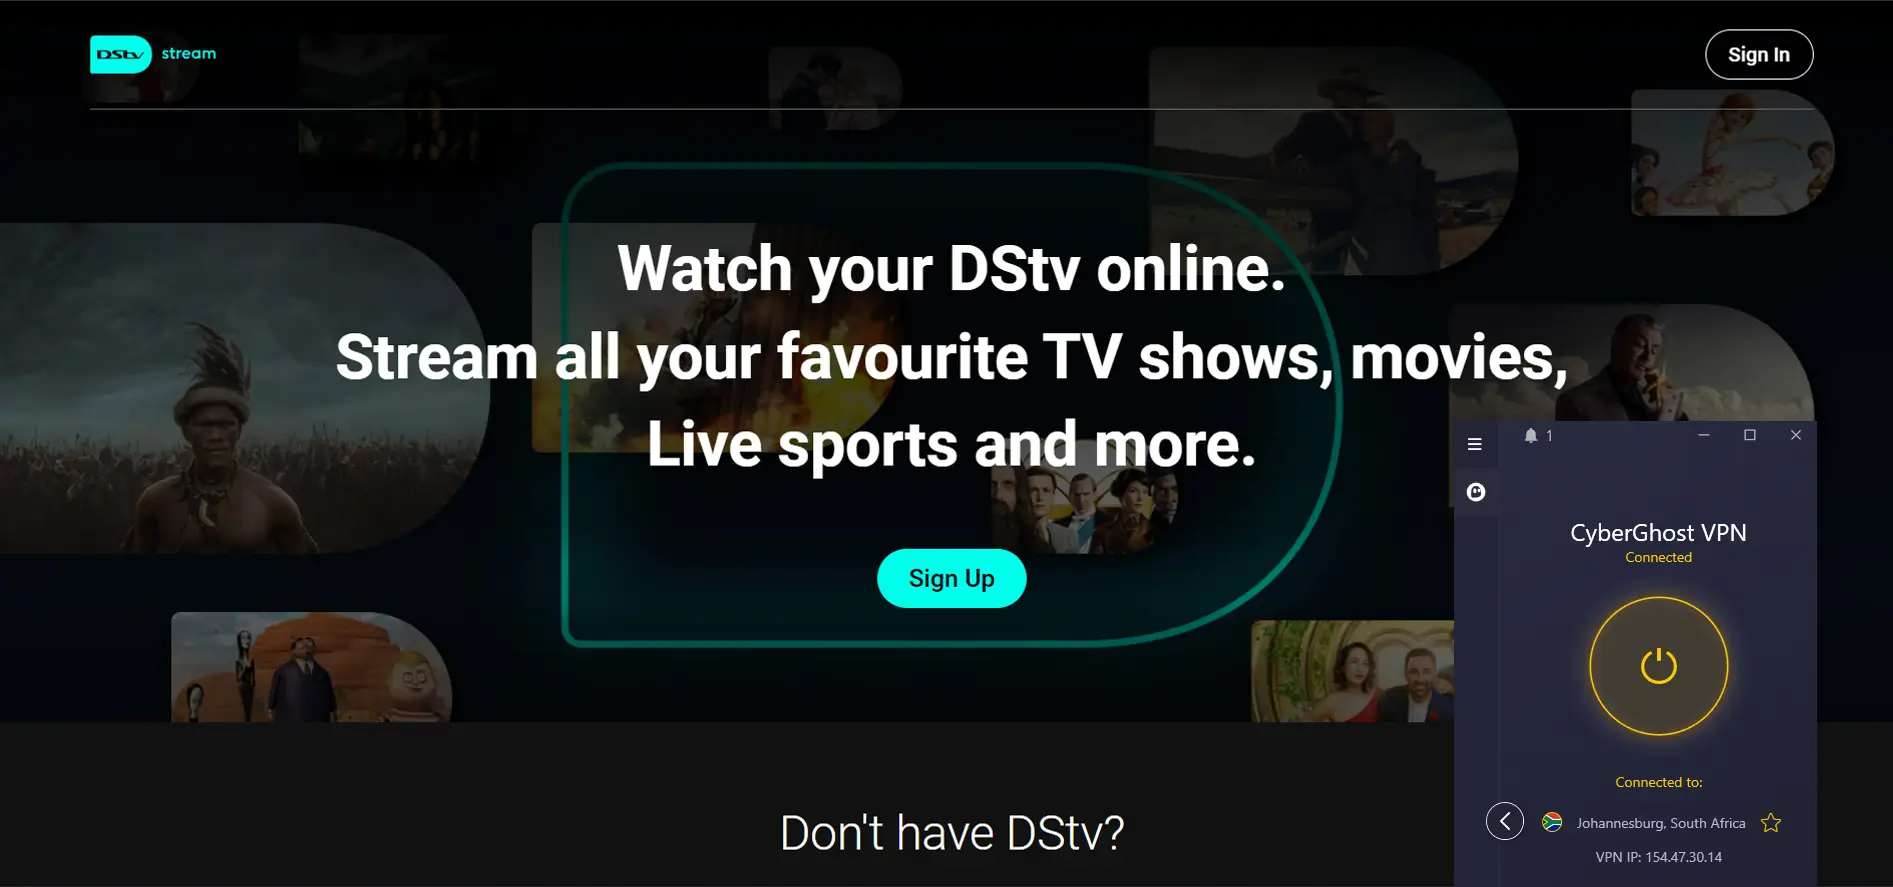 Dstv in india with cyberghost